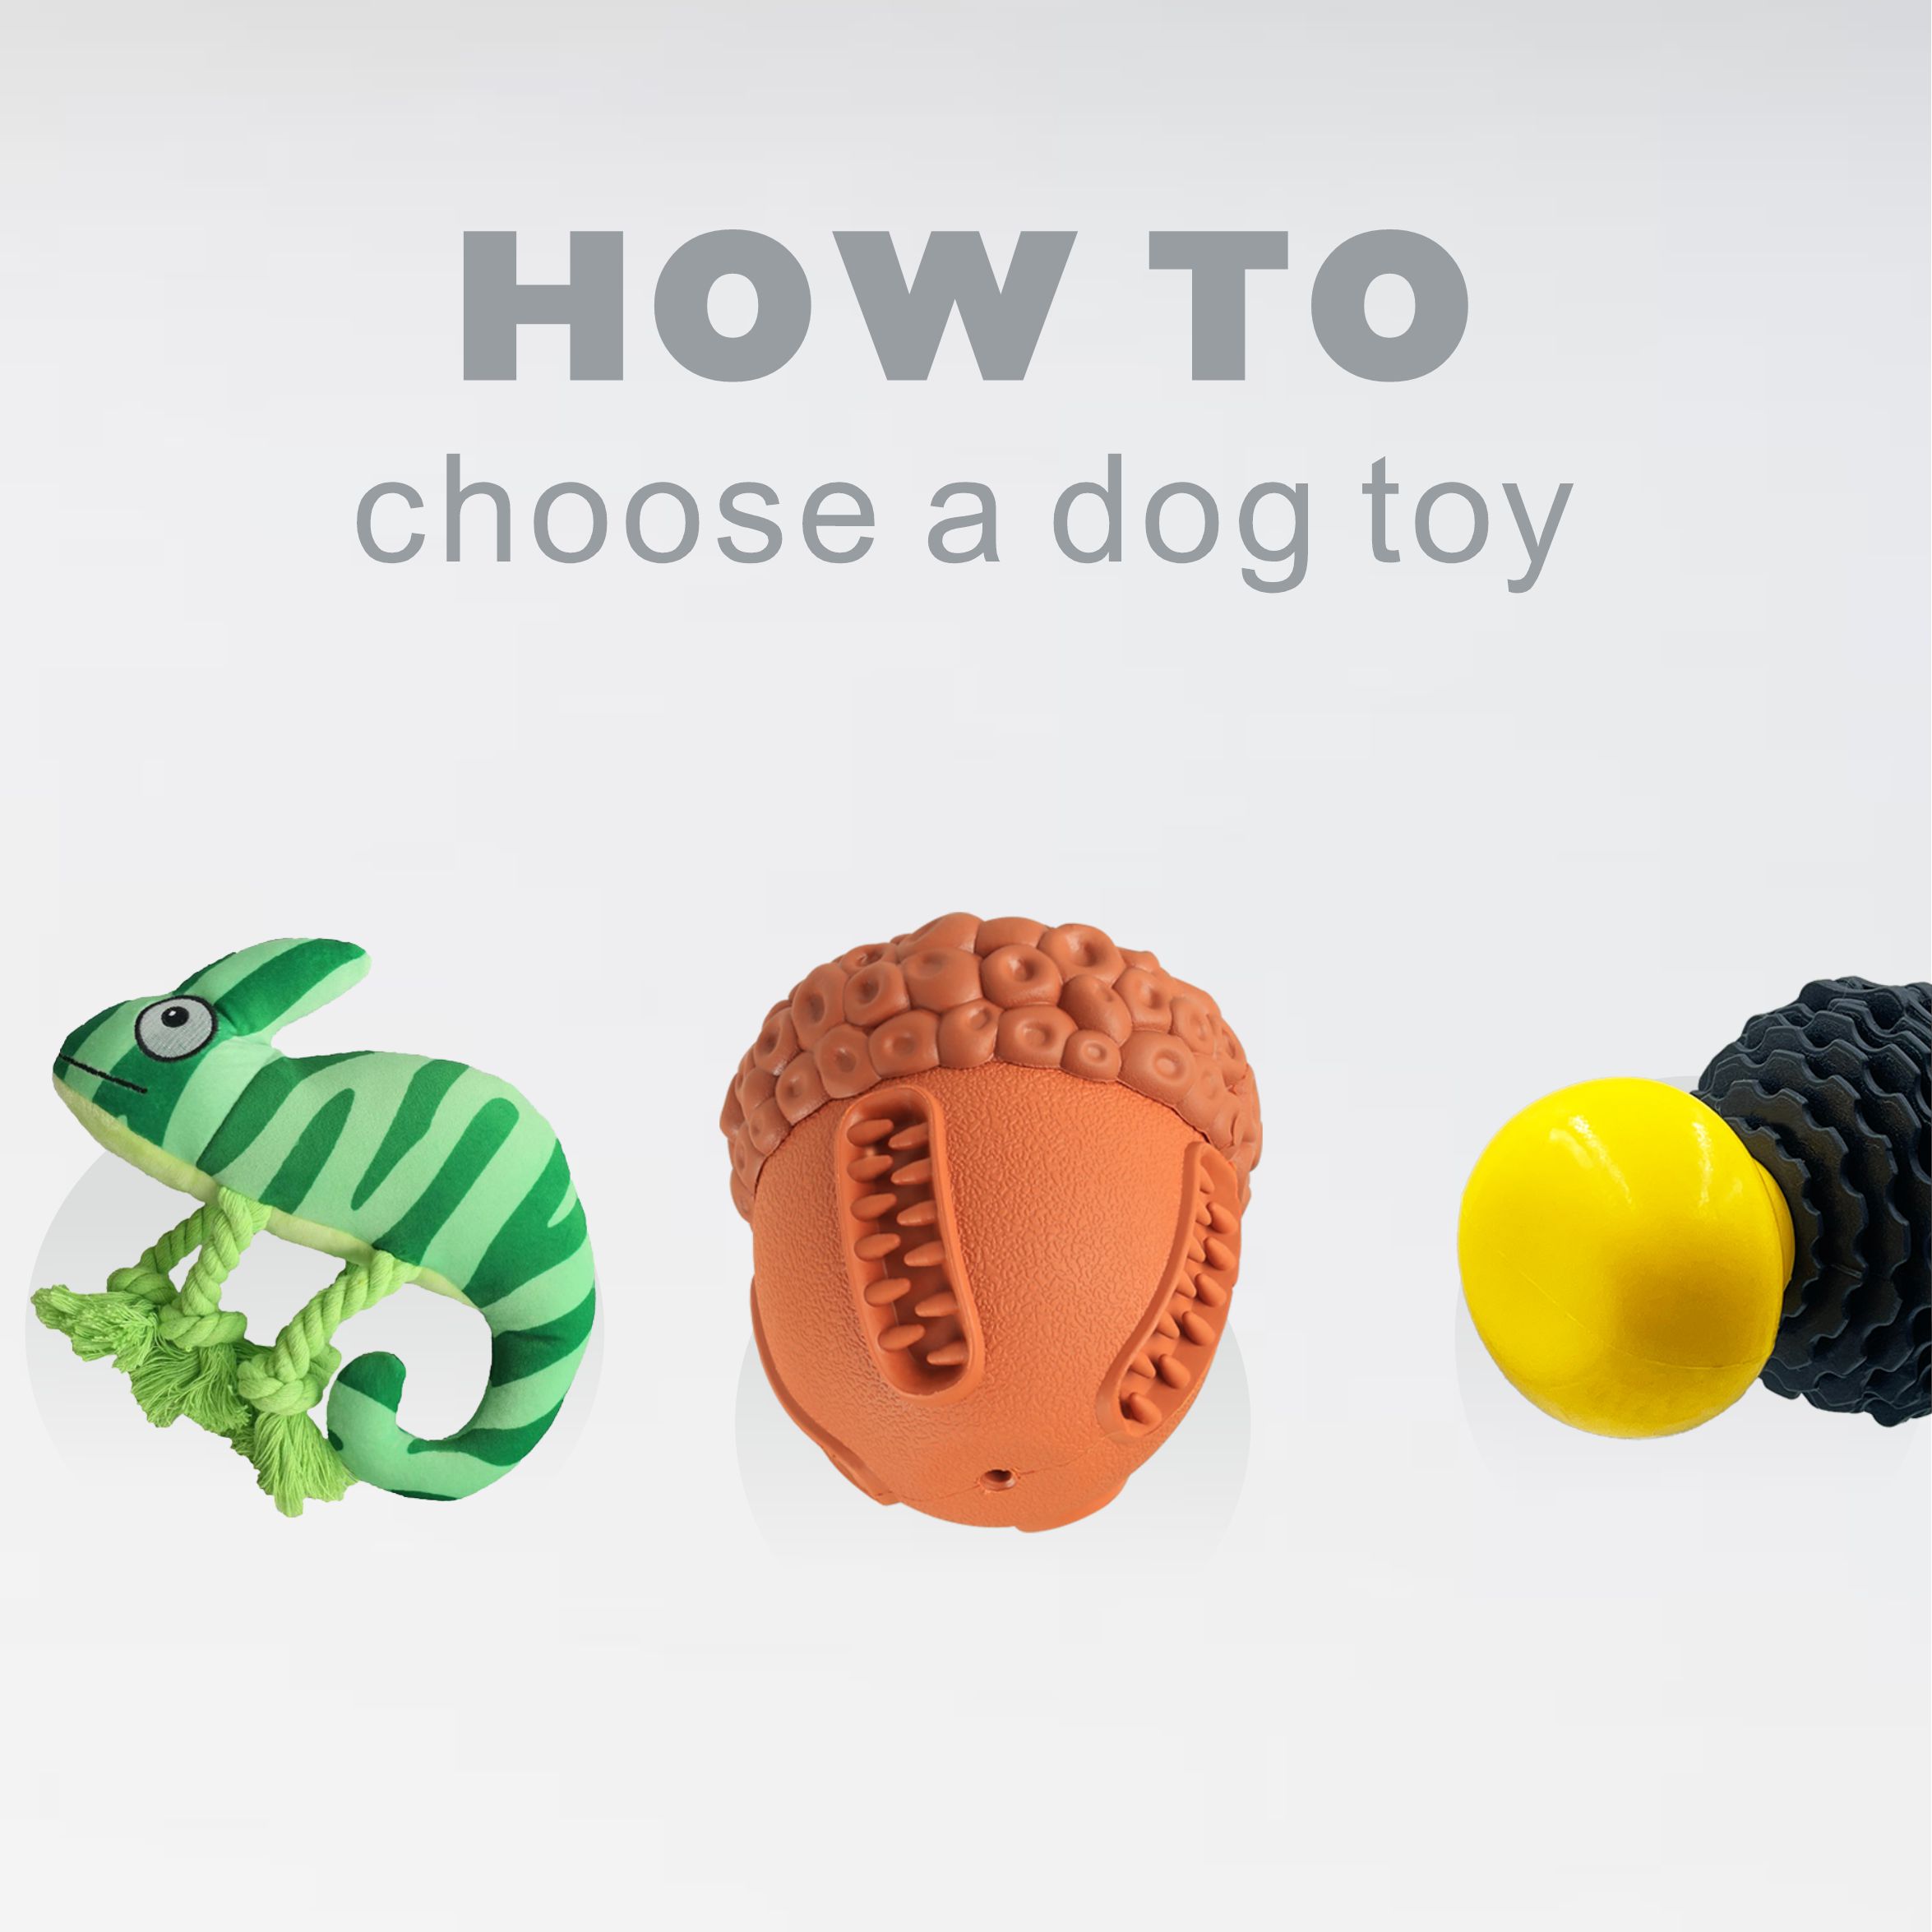 How to choose a dog toy